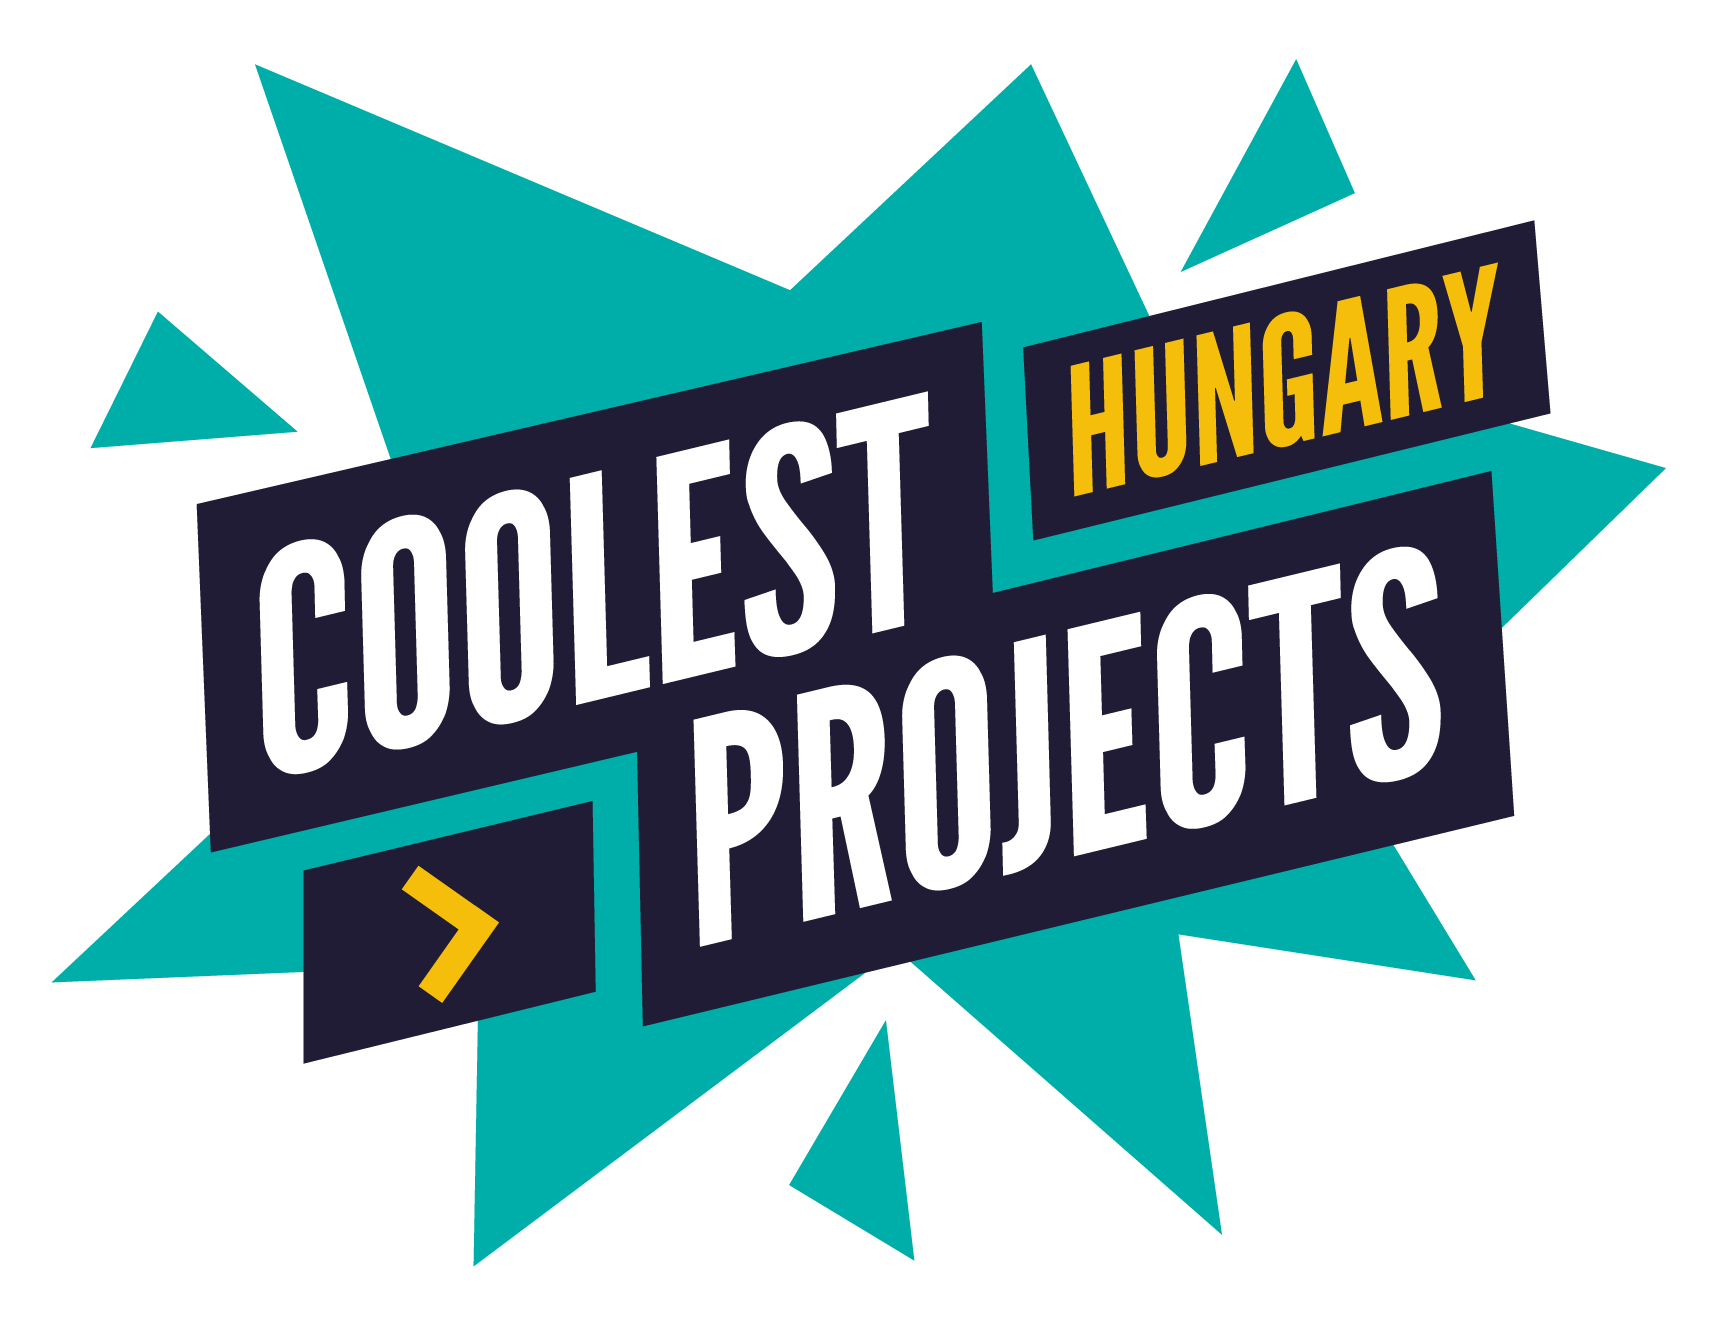 coolest_projects_hungary_logo.png